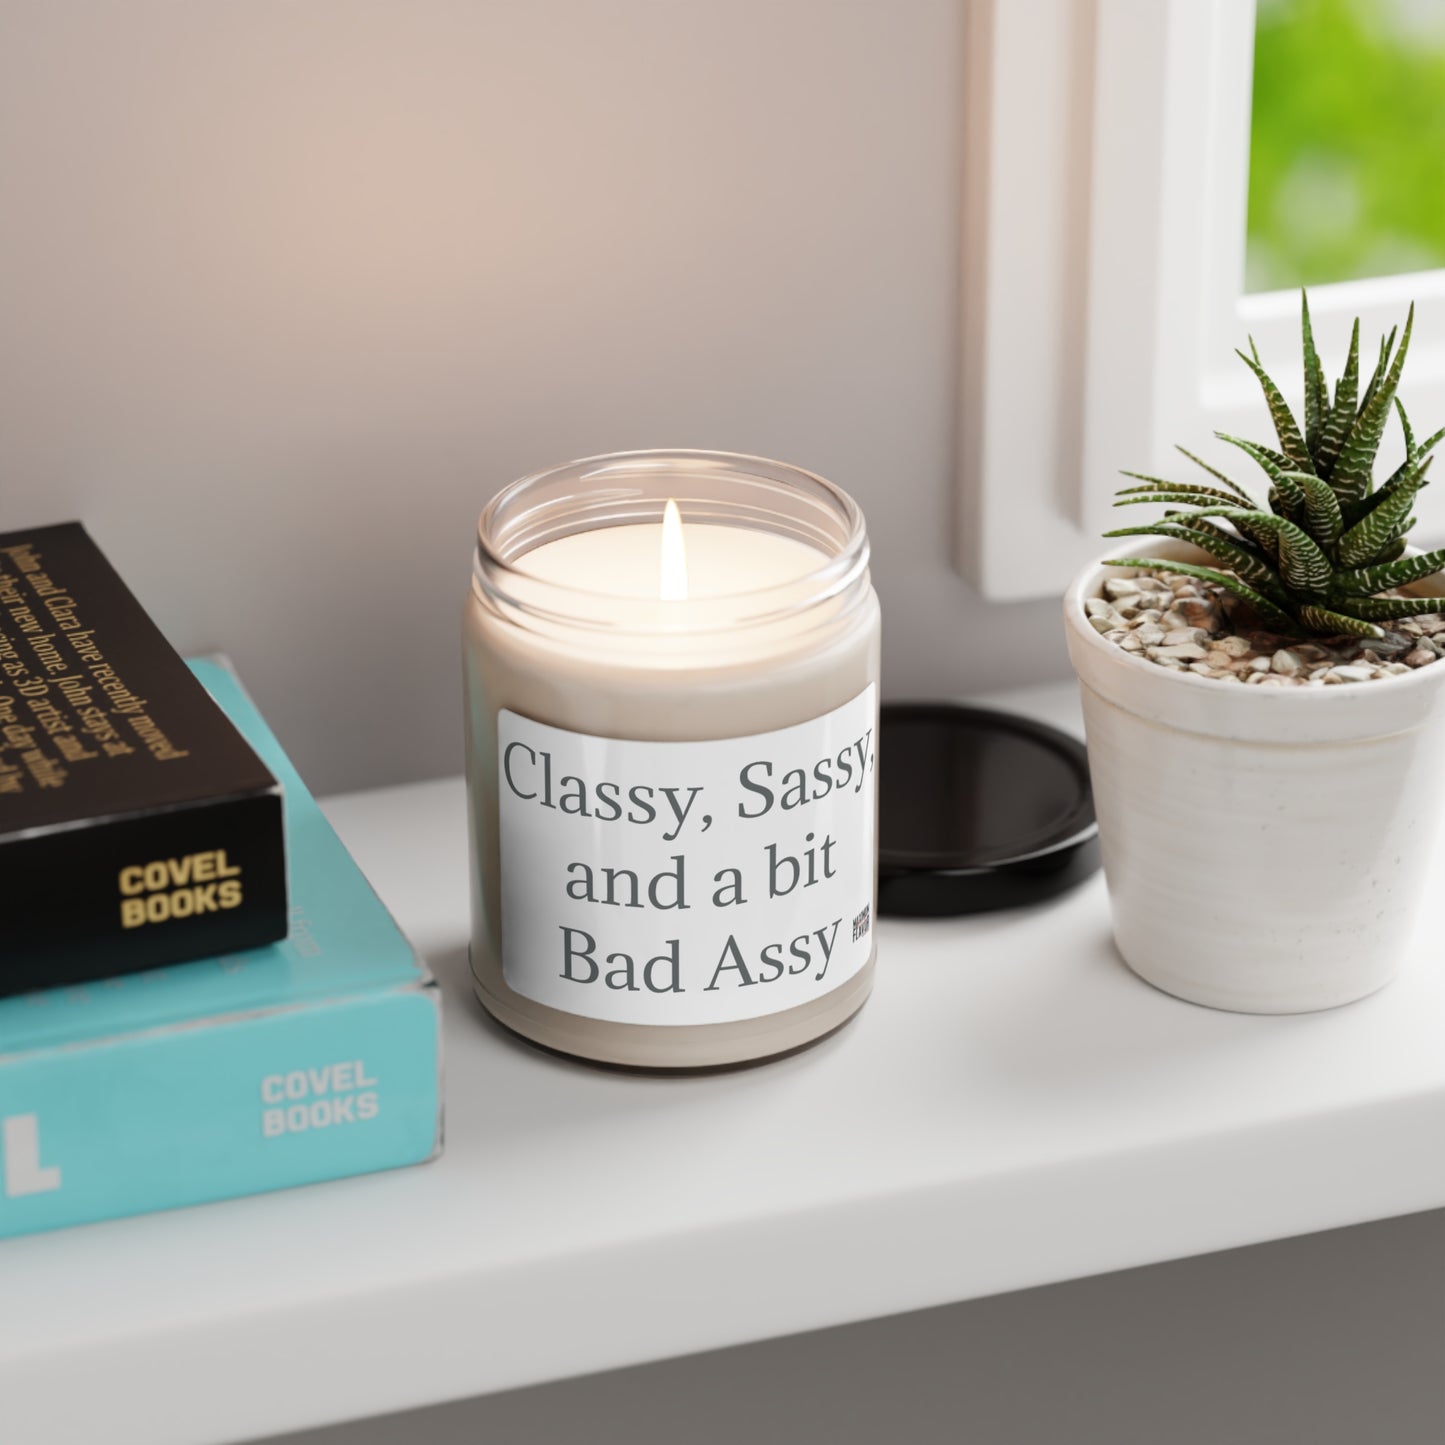 Classy, Sassy, and a Bit Bad Assy Scented Soy Candle, 9oz